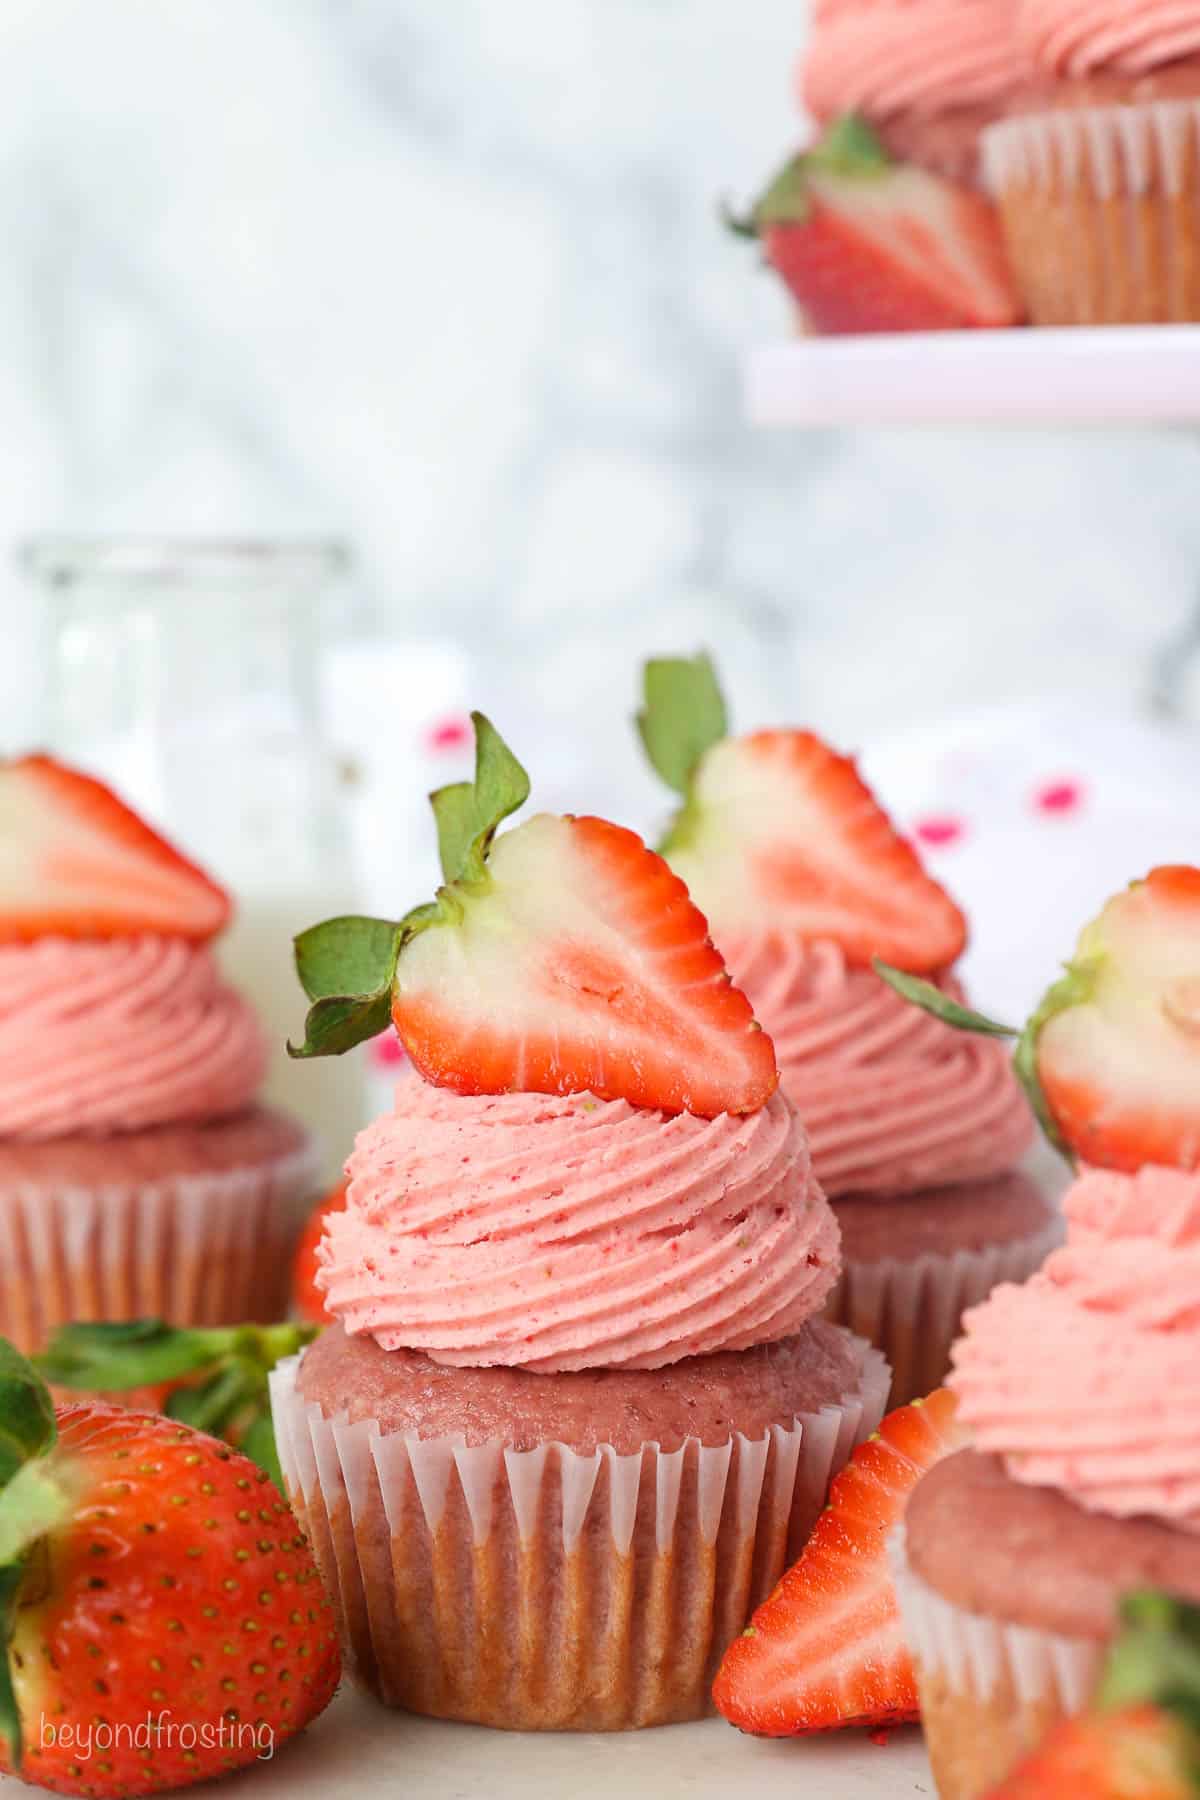 Assorted strawberry cupcakes with swirls of strawberry frosting garnished with fresh strawberries.